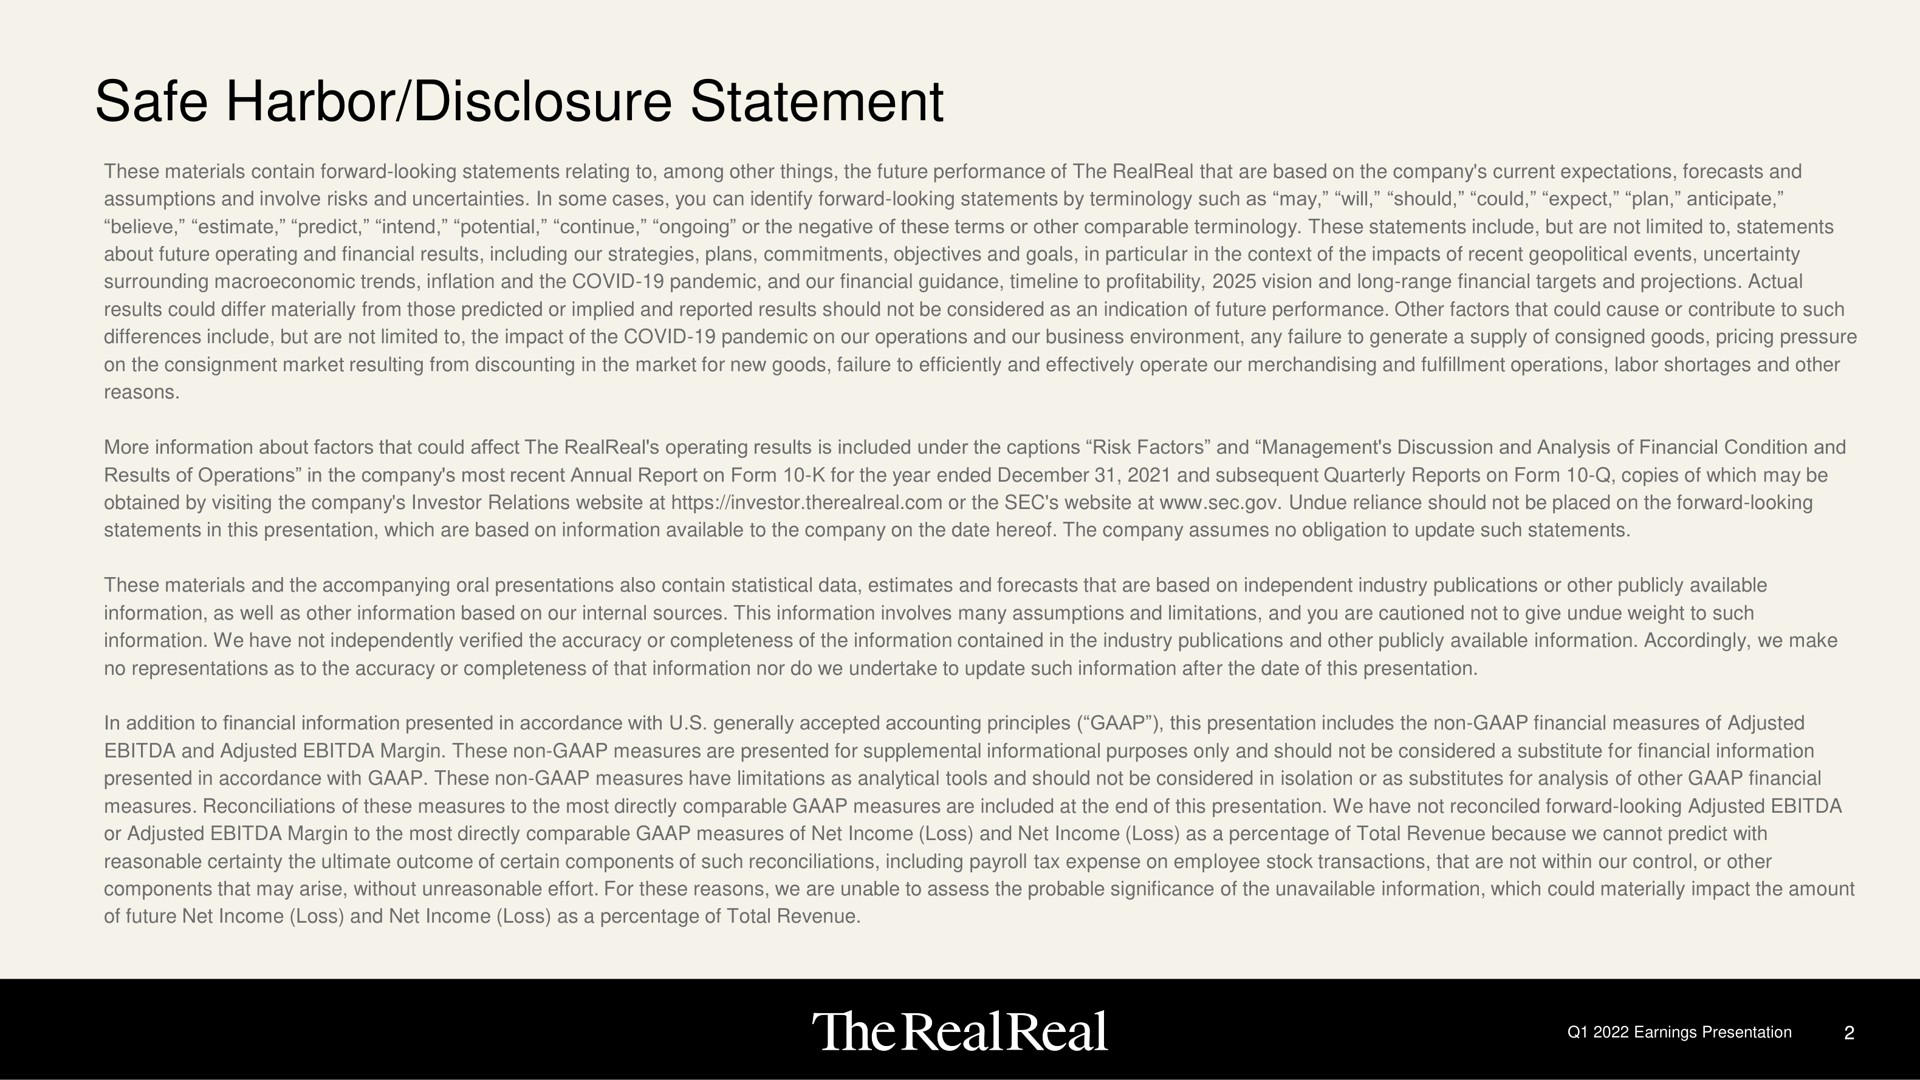 safe harbor disclosure statement | The RealReal